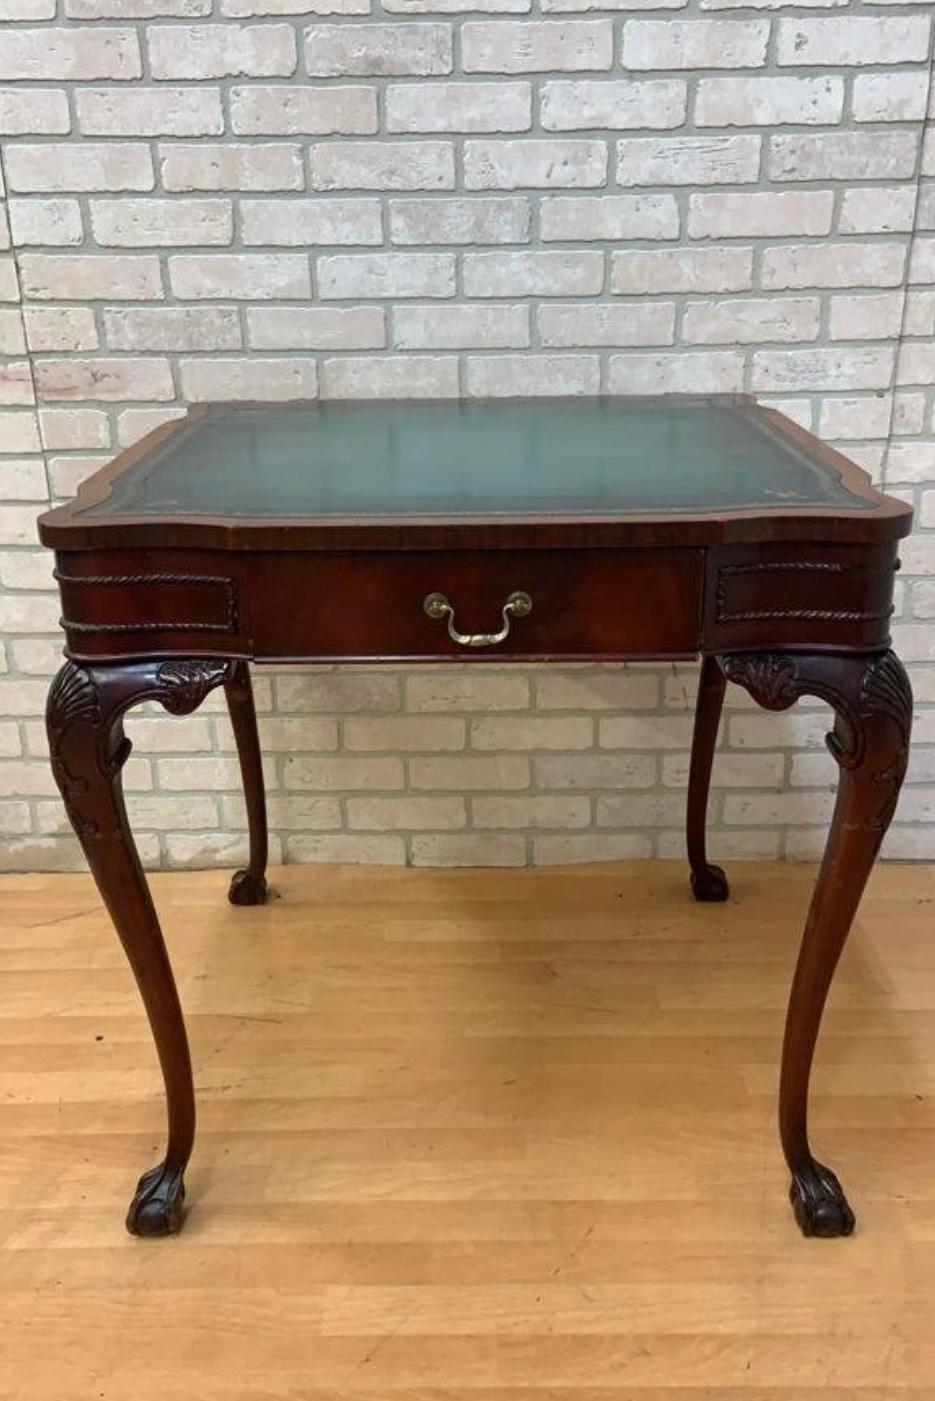 Antique Chippendale Carved Mahogany Single Drawer Leather Top Game Table

A superb antique Irish George II style serpentine mahogany leather-top card/game table. The frieze has a serpentine front drawer with a Rococo style swan neck handle and a